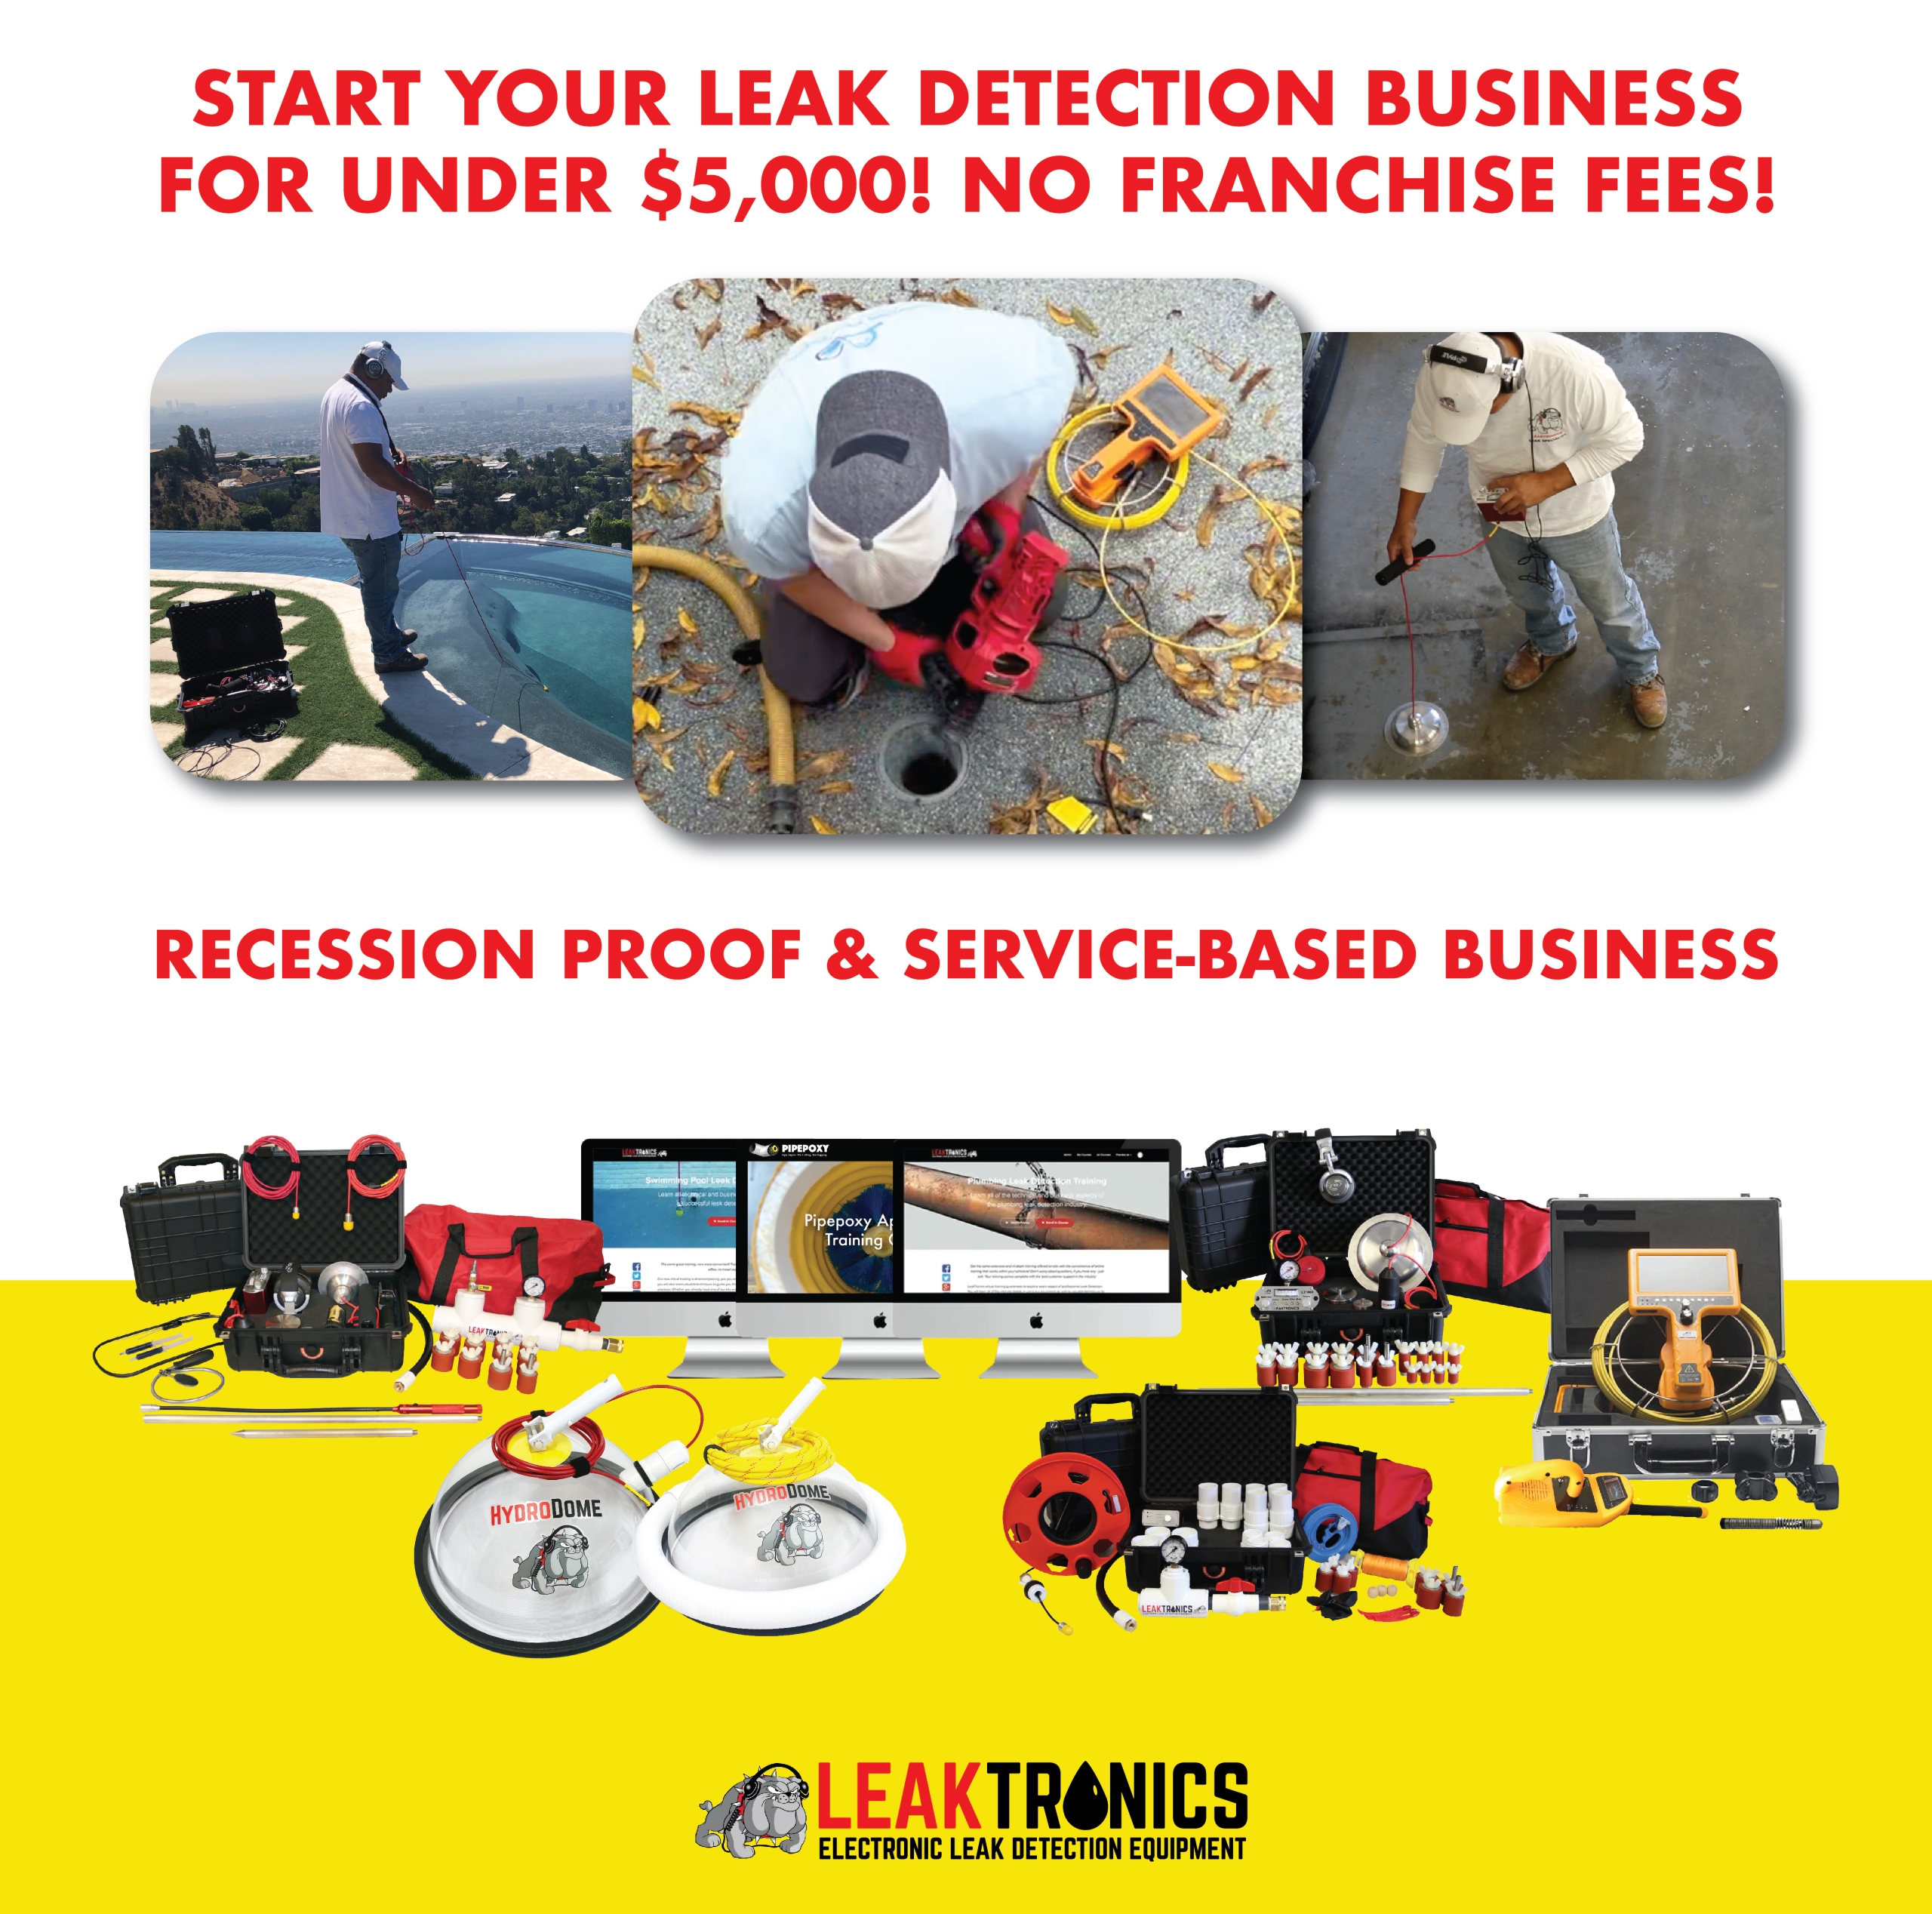 Starting Your Leak Detection Business: A Success Guide